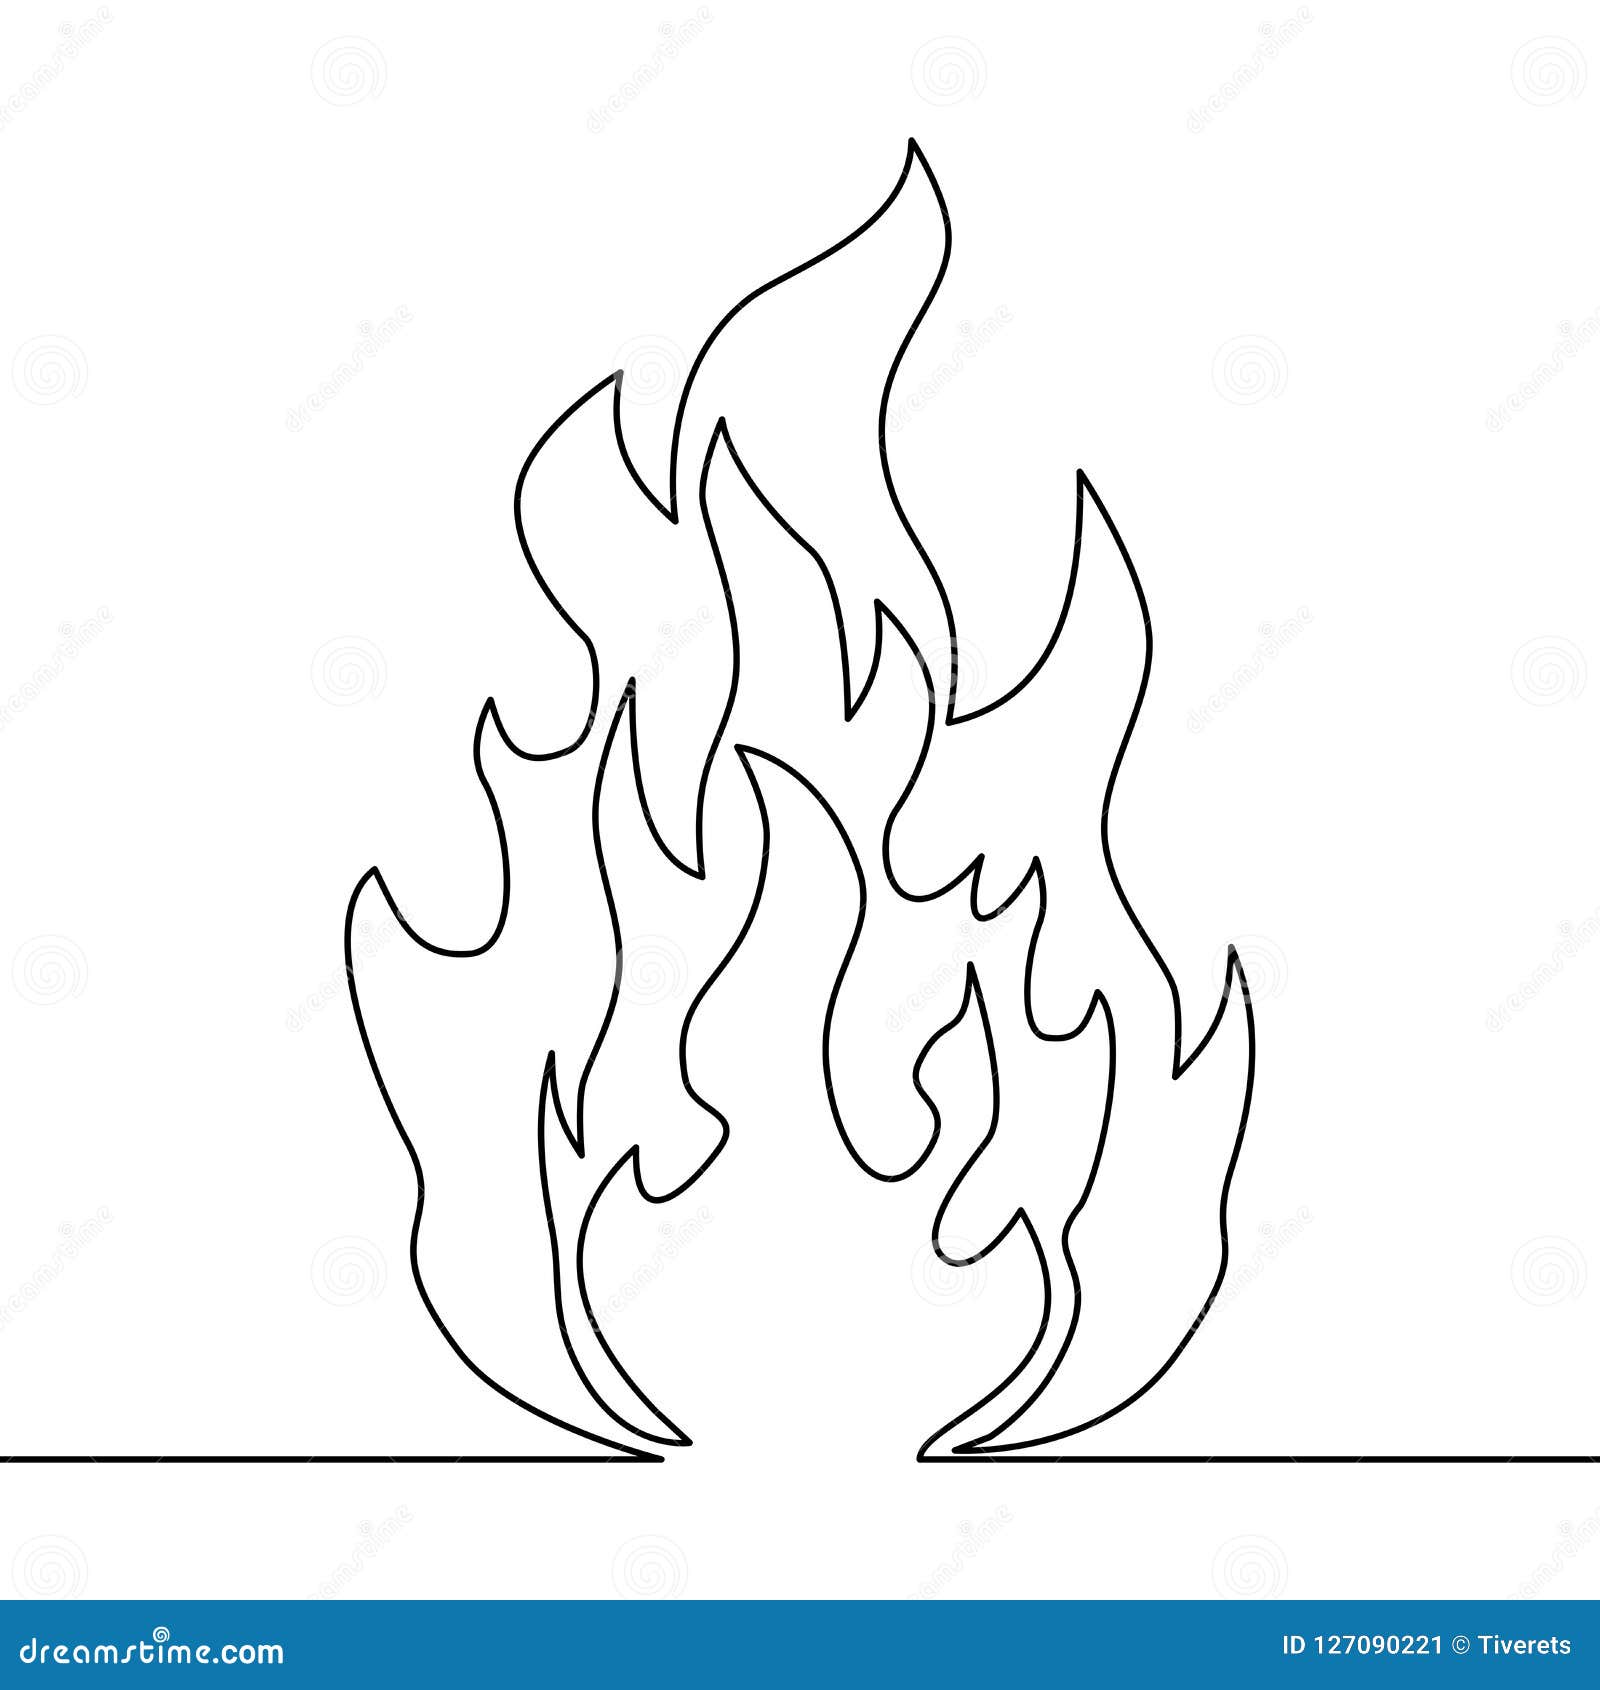 Fire Safety Continuous Line Drawing Stock Illustrations – 187 Fire